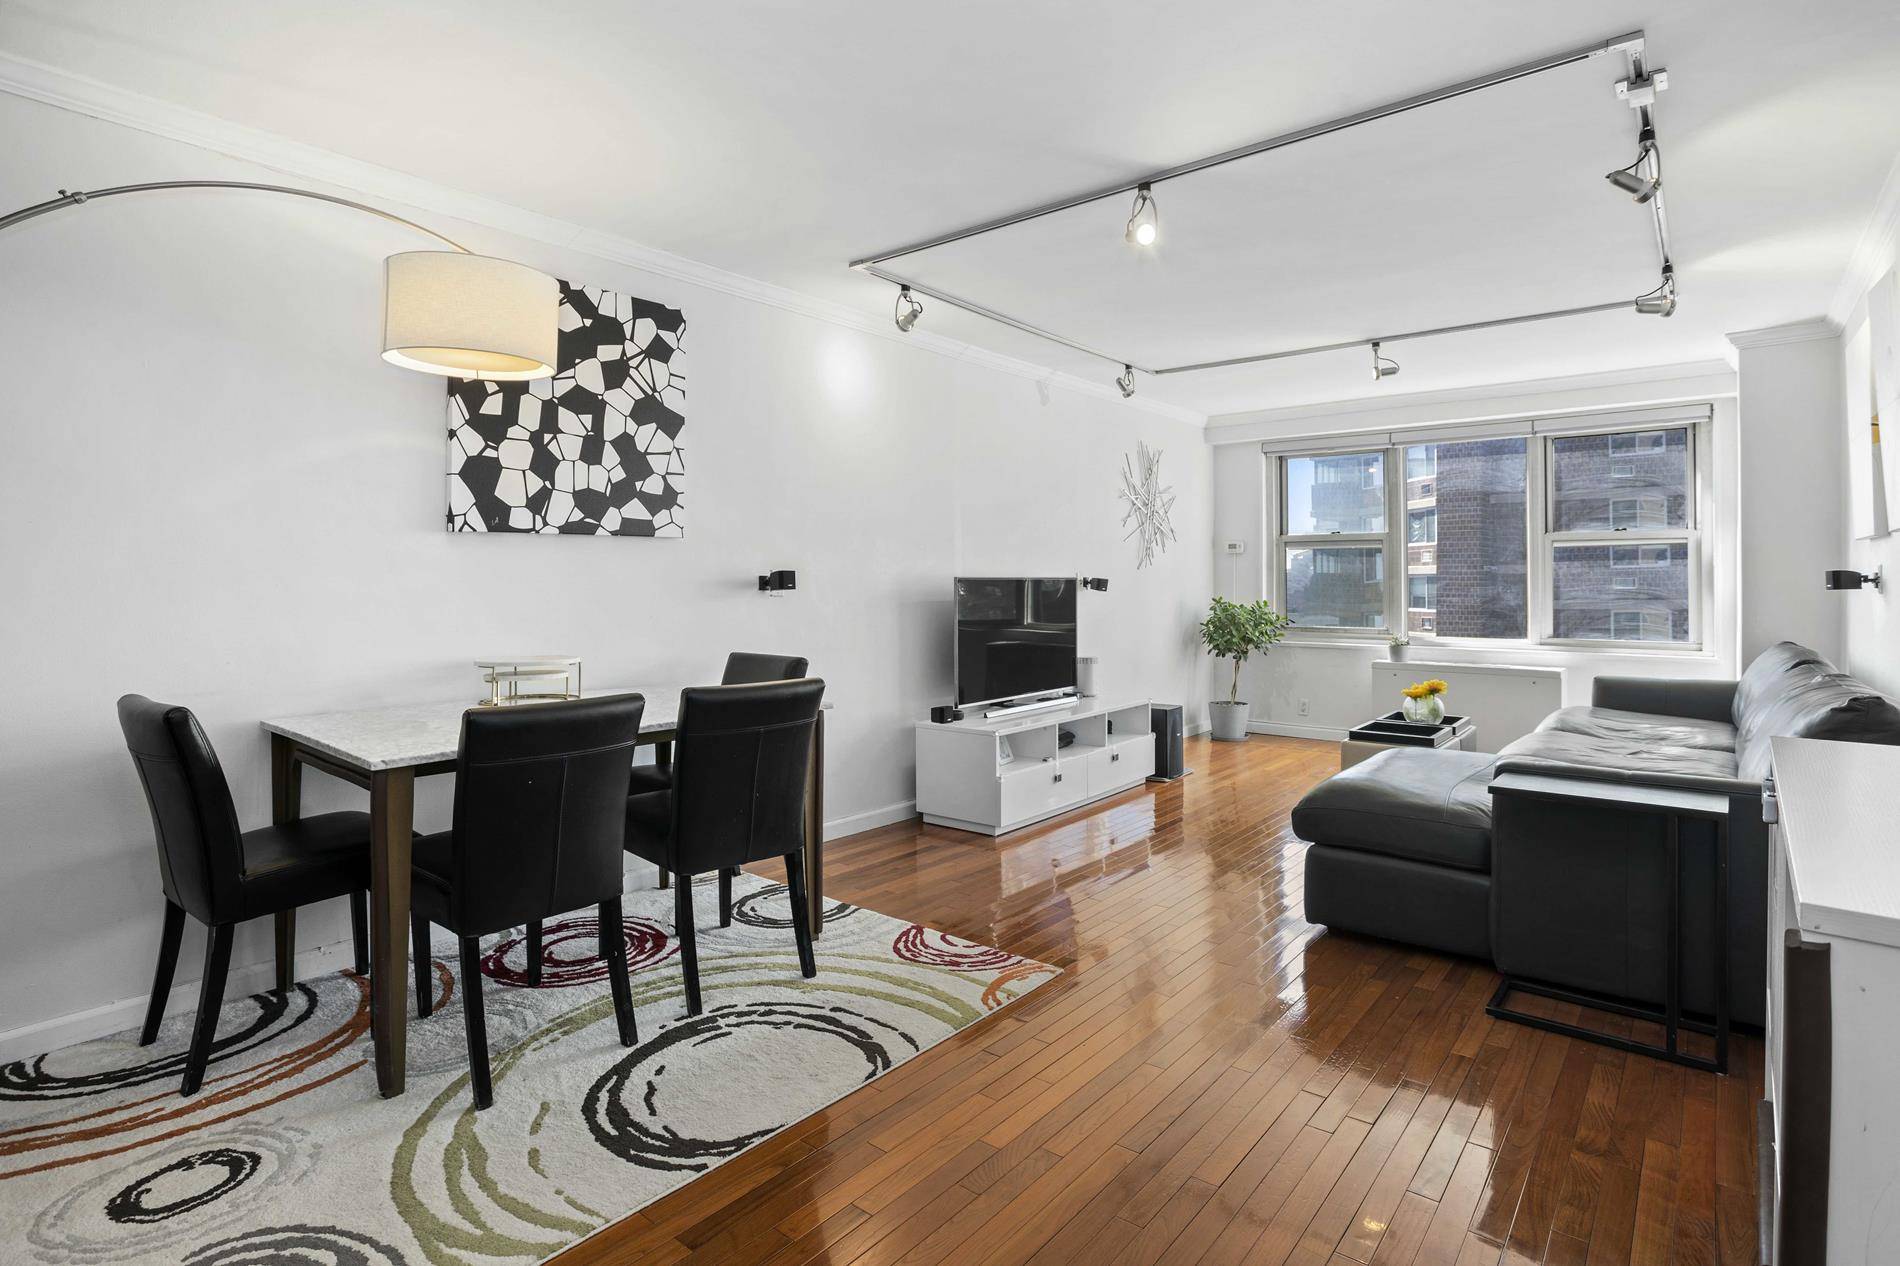 MOVE IN READY ! This one of a kind, south facing extra large one bedroom offers an abundance of sunlight and views downtown including the Freedom Tower !